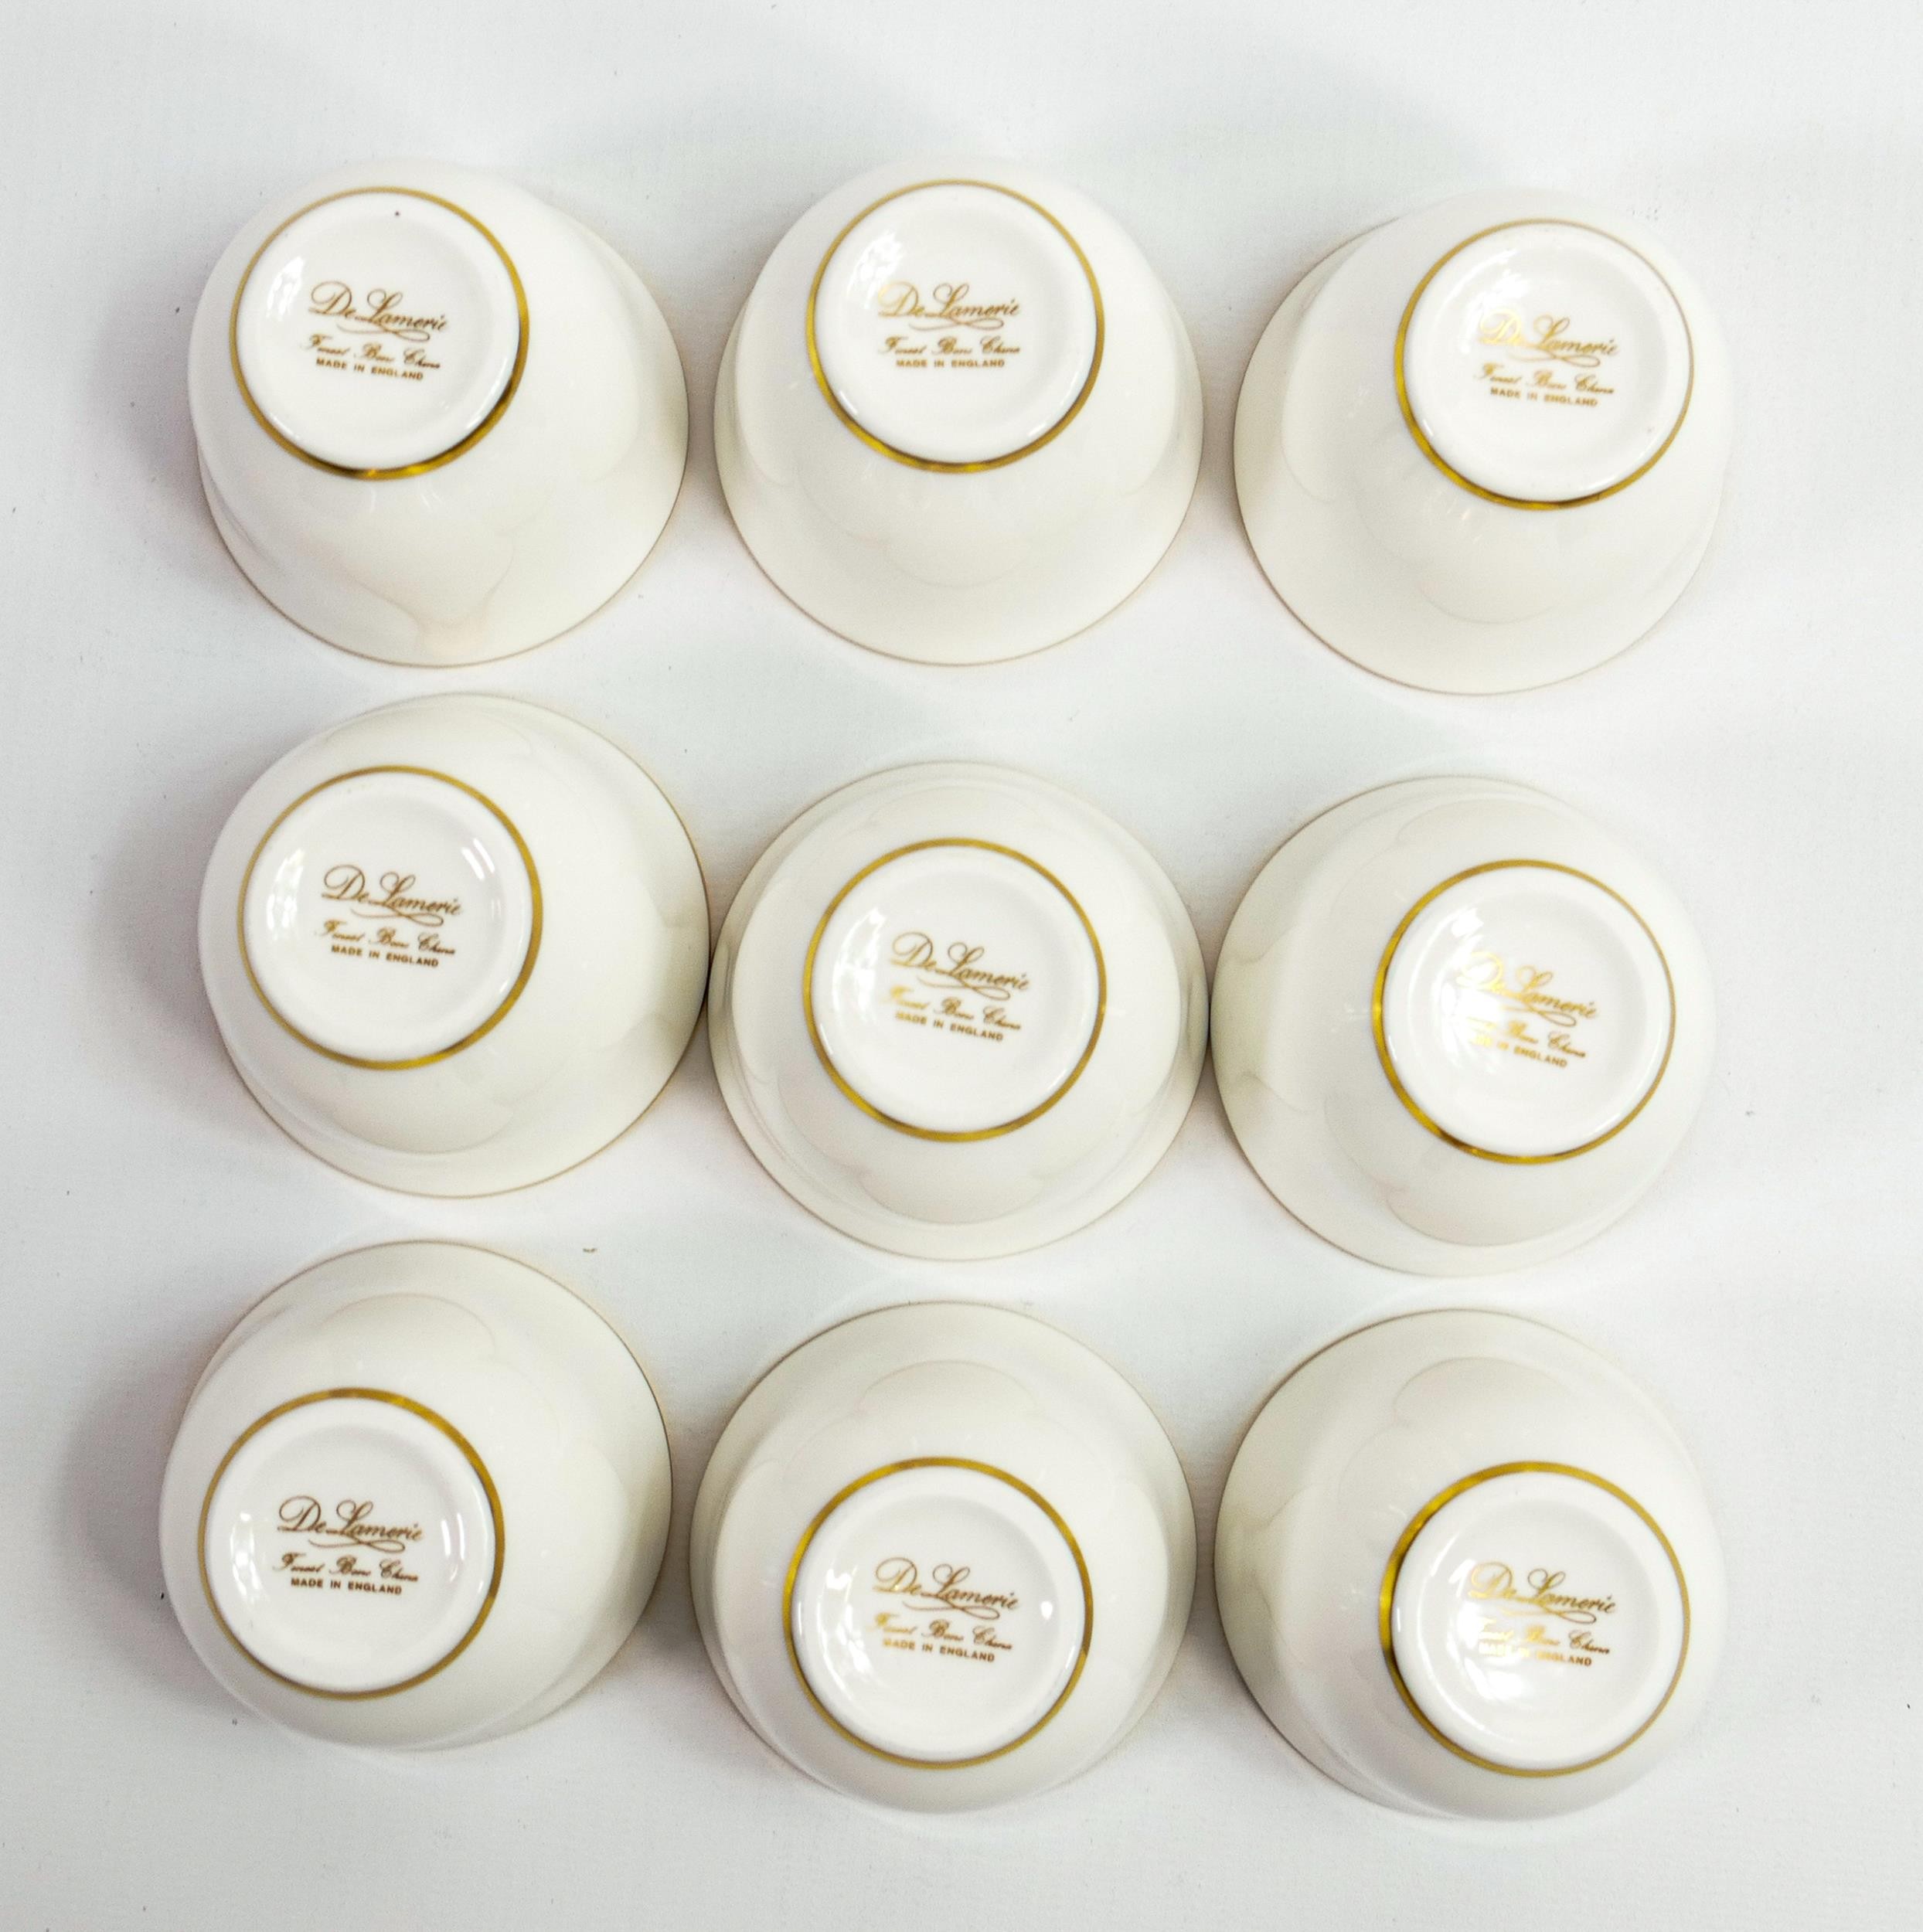 De Lamerie Fine Bone China heavily gilded crested tea bowls, specially made high end quality - Image 2 of 3